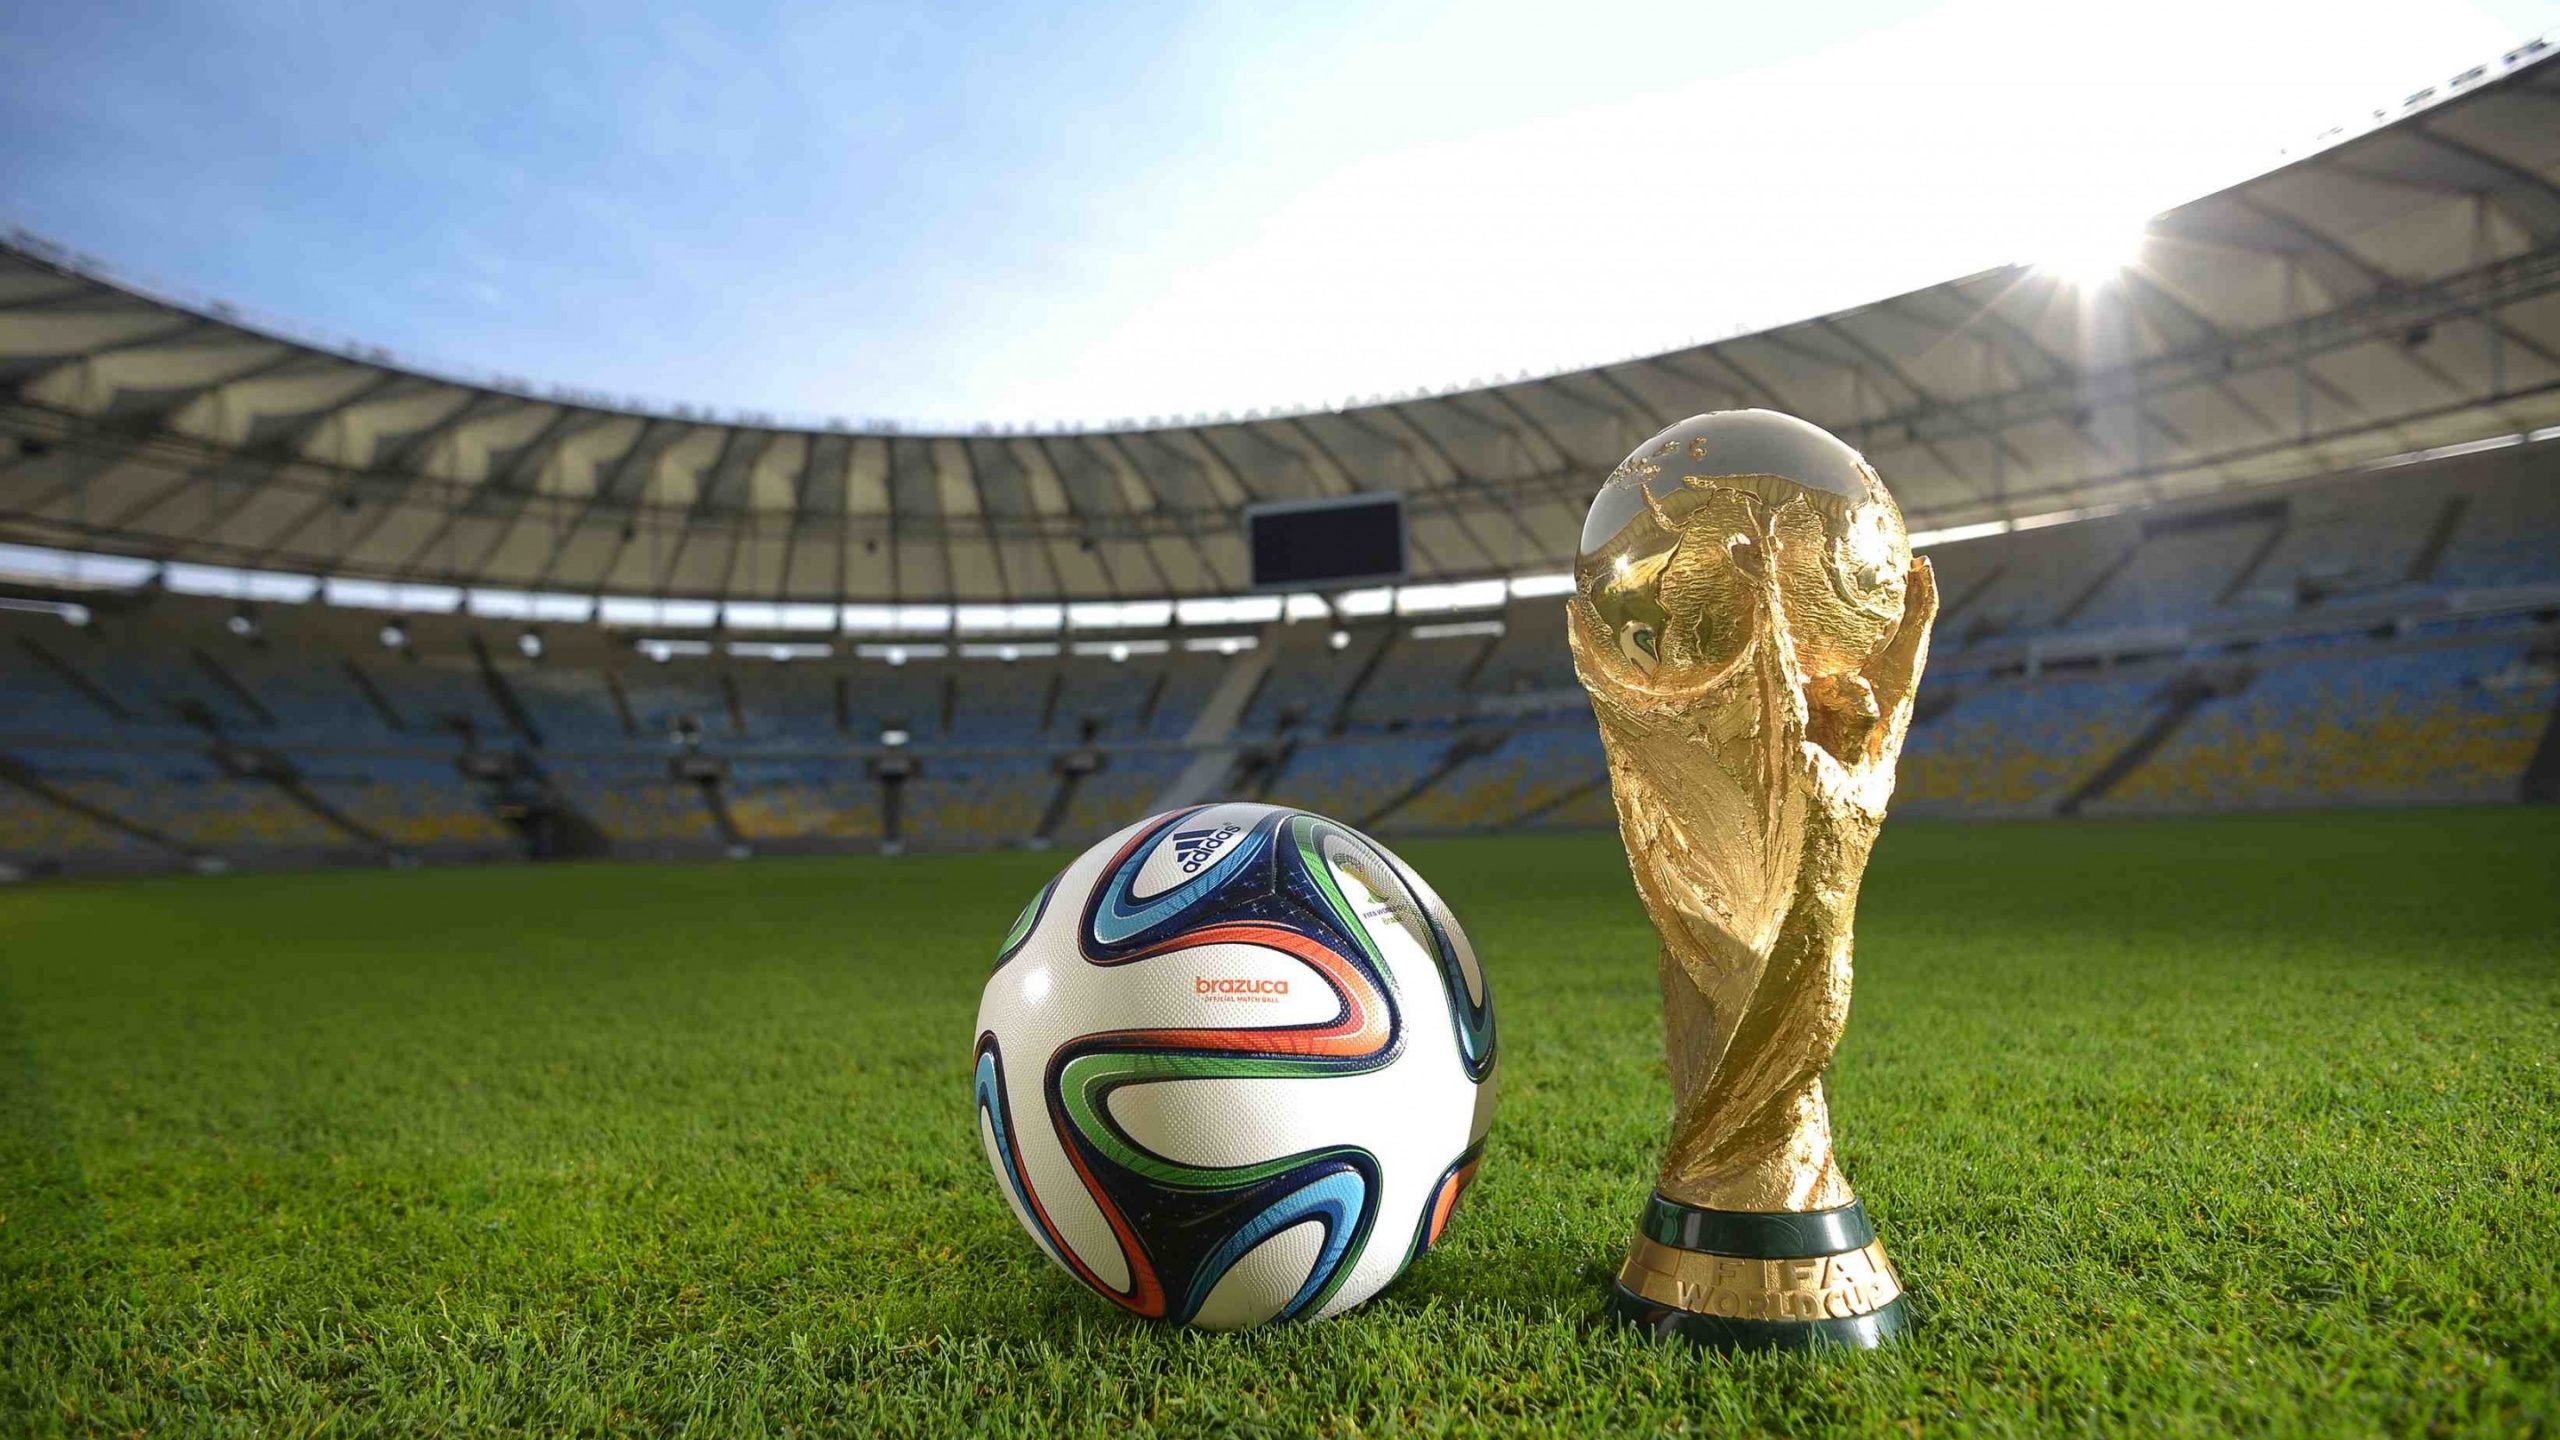 Brazuca Ball World Cup Trophy 2014